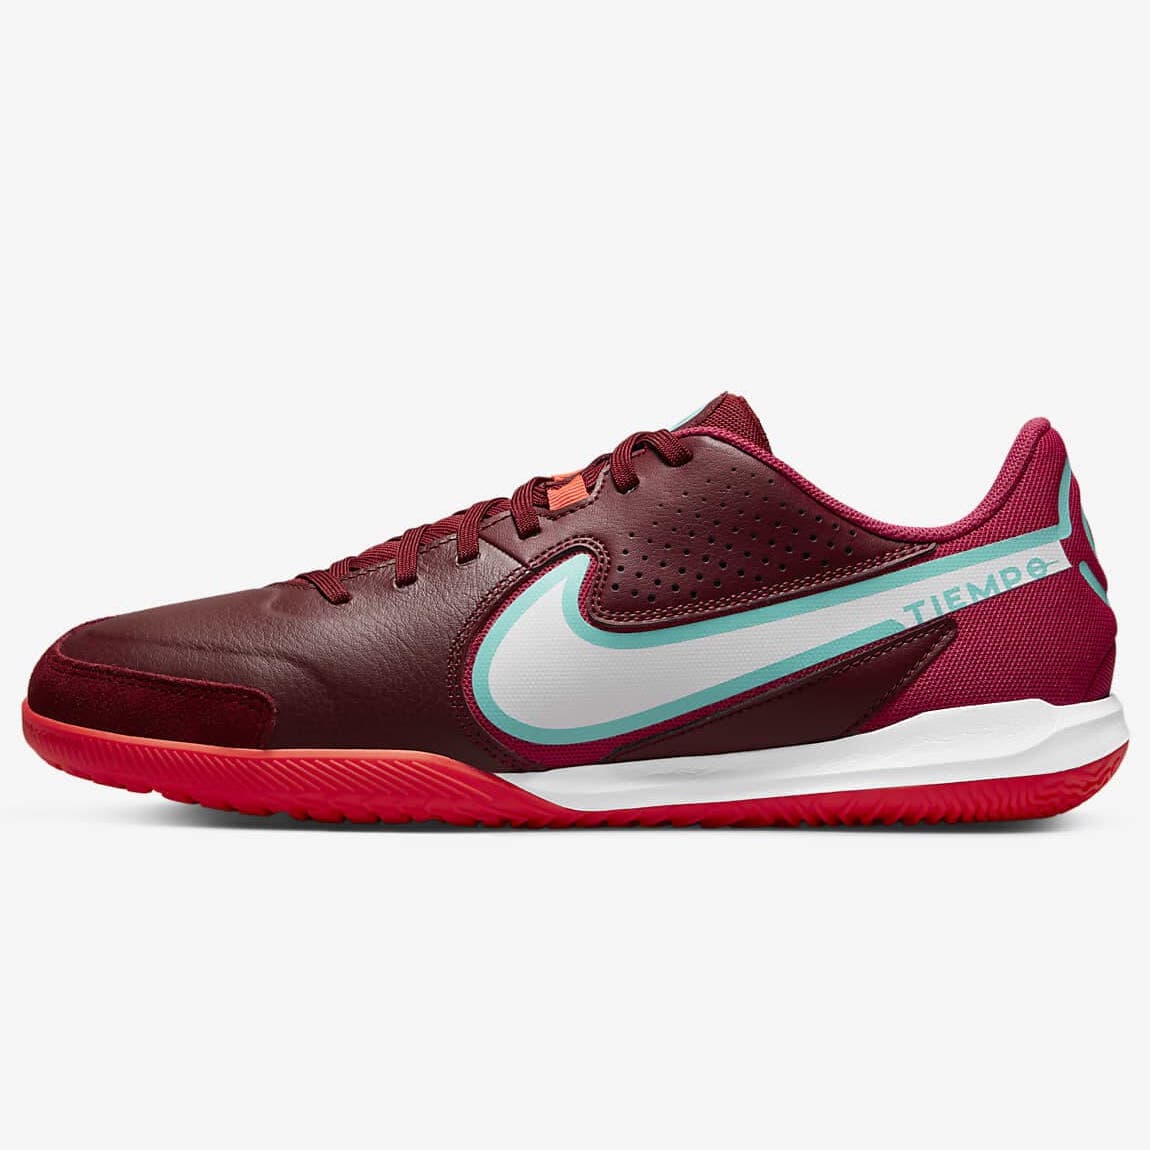 Nike Legend 9 Academy Indoor - Red-White (Side 1)